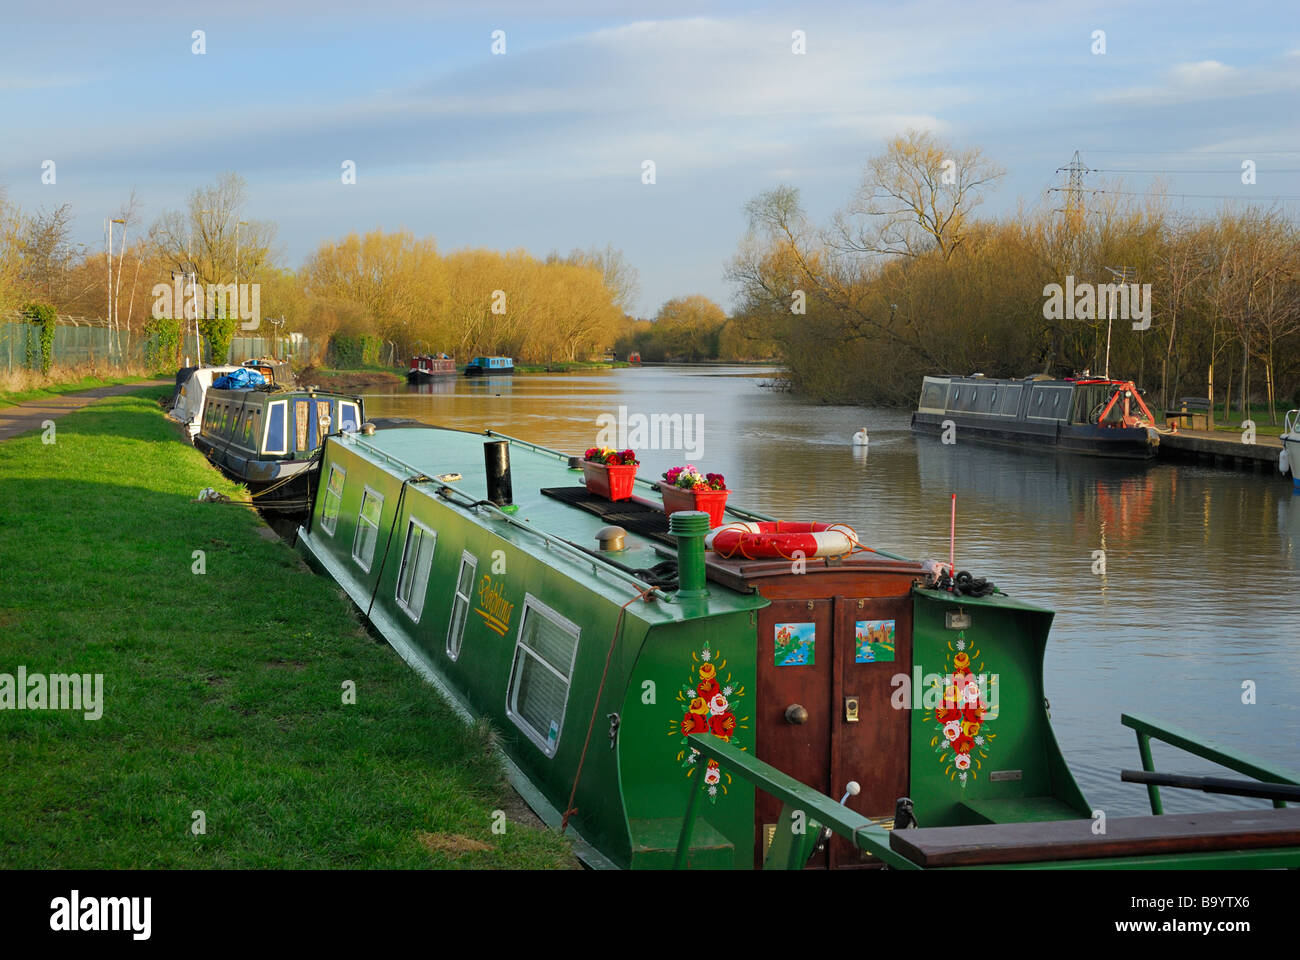 Narrowboats moored on the River Lee near Ware in Hertfordshire, England, UK Stock Photo